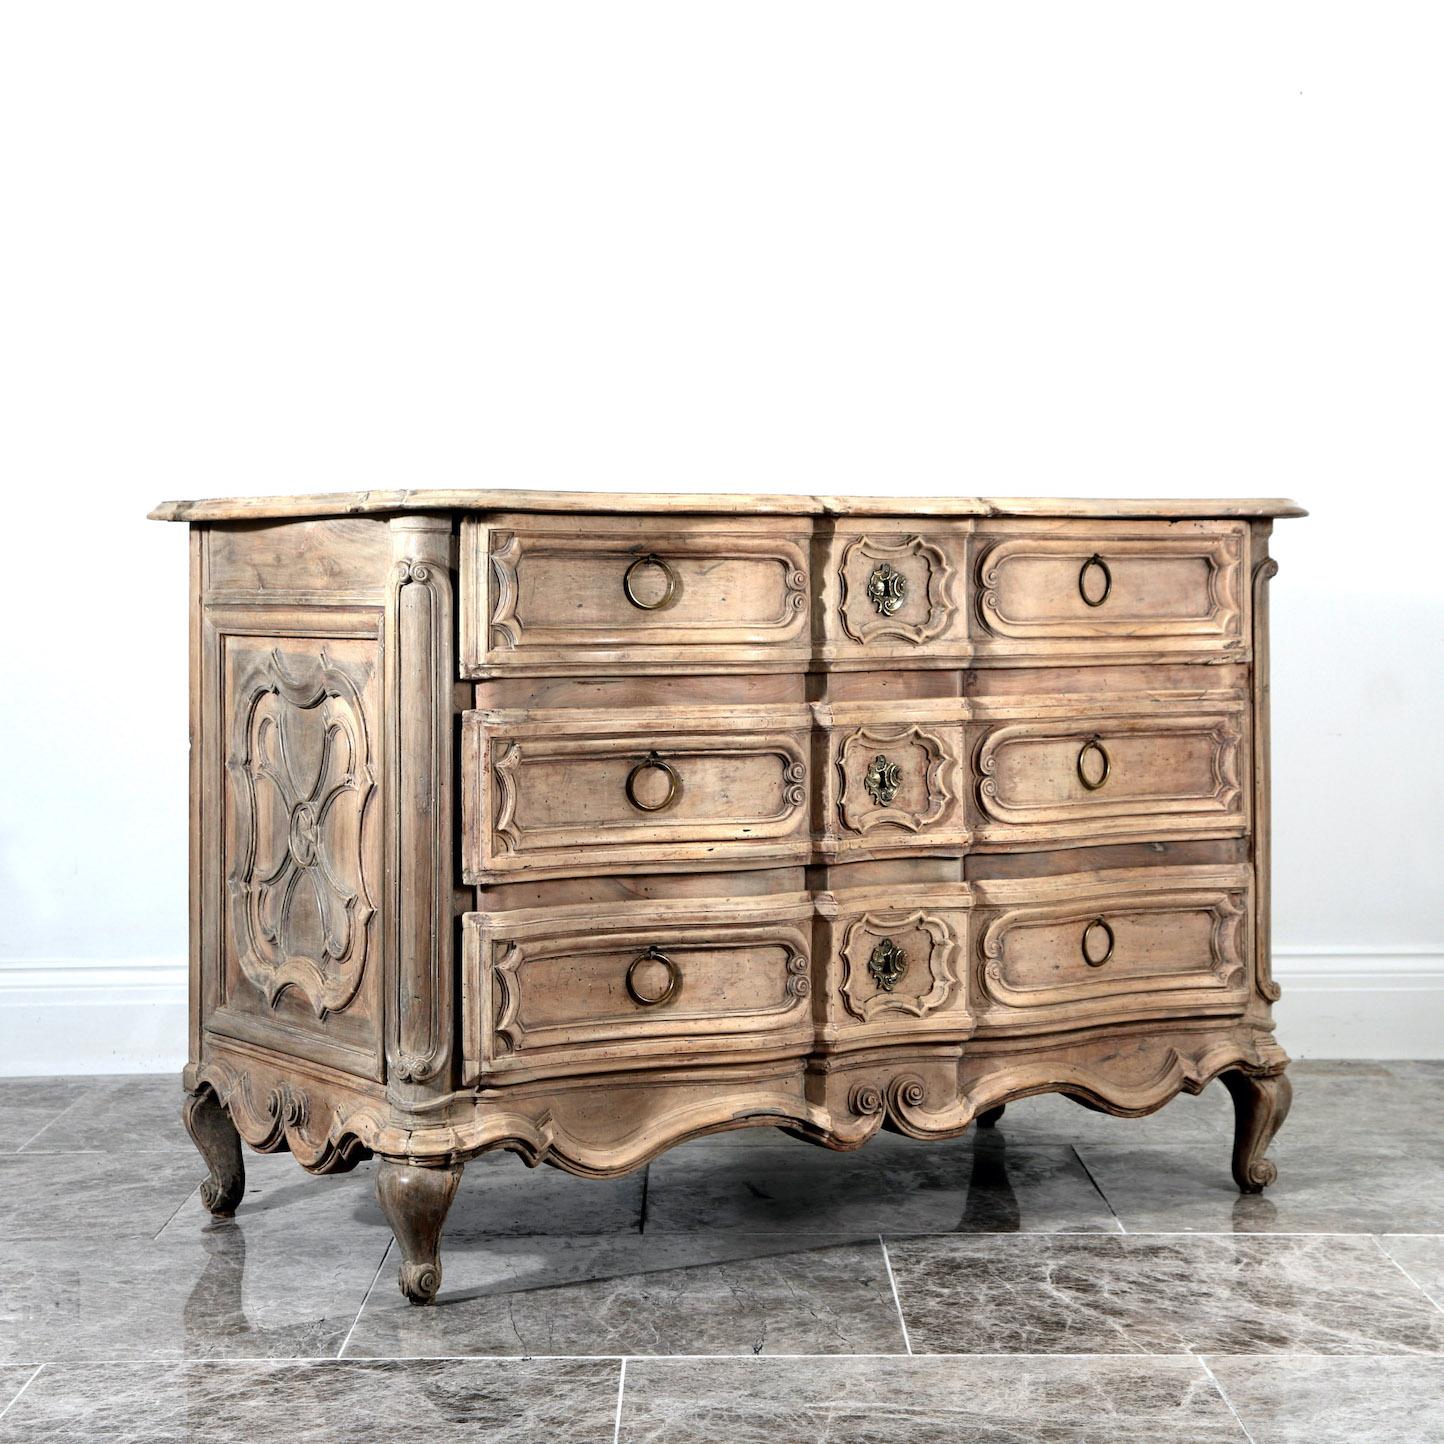 Vagabond Antiques presents an 18th century French commode

France, last quarter of the 18th century

”An 18th century walnut commode, subtly washed back to a smooth, paler hue”.